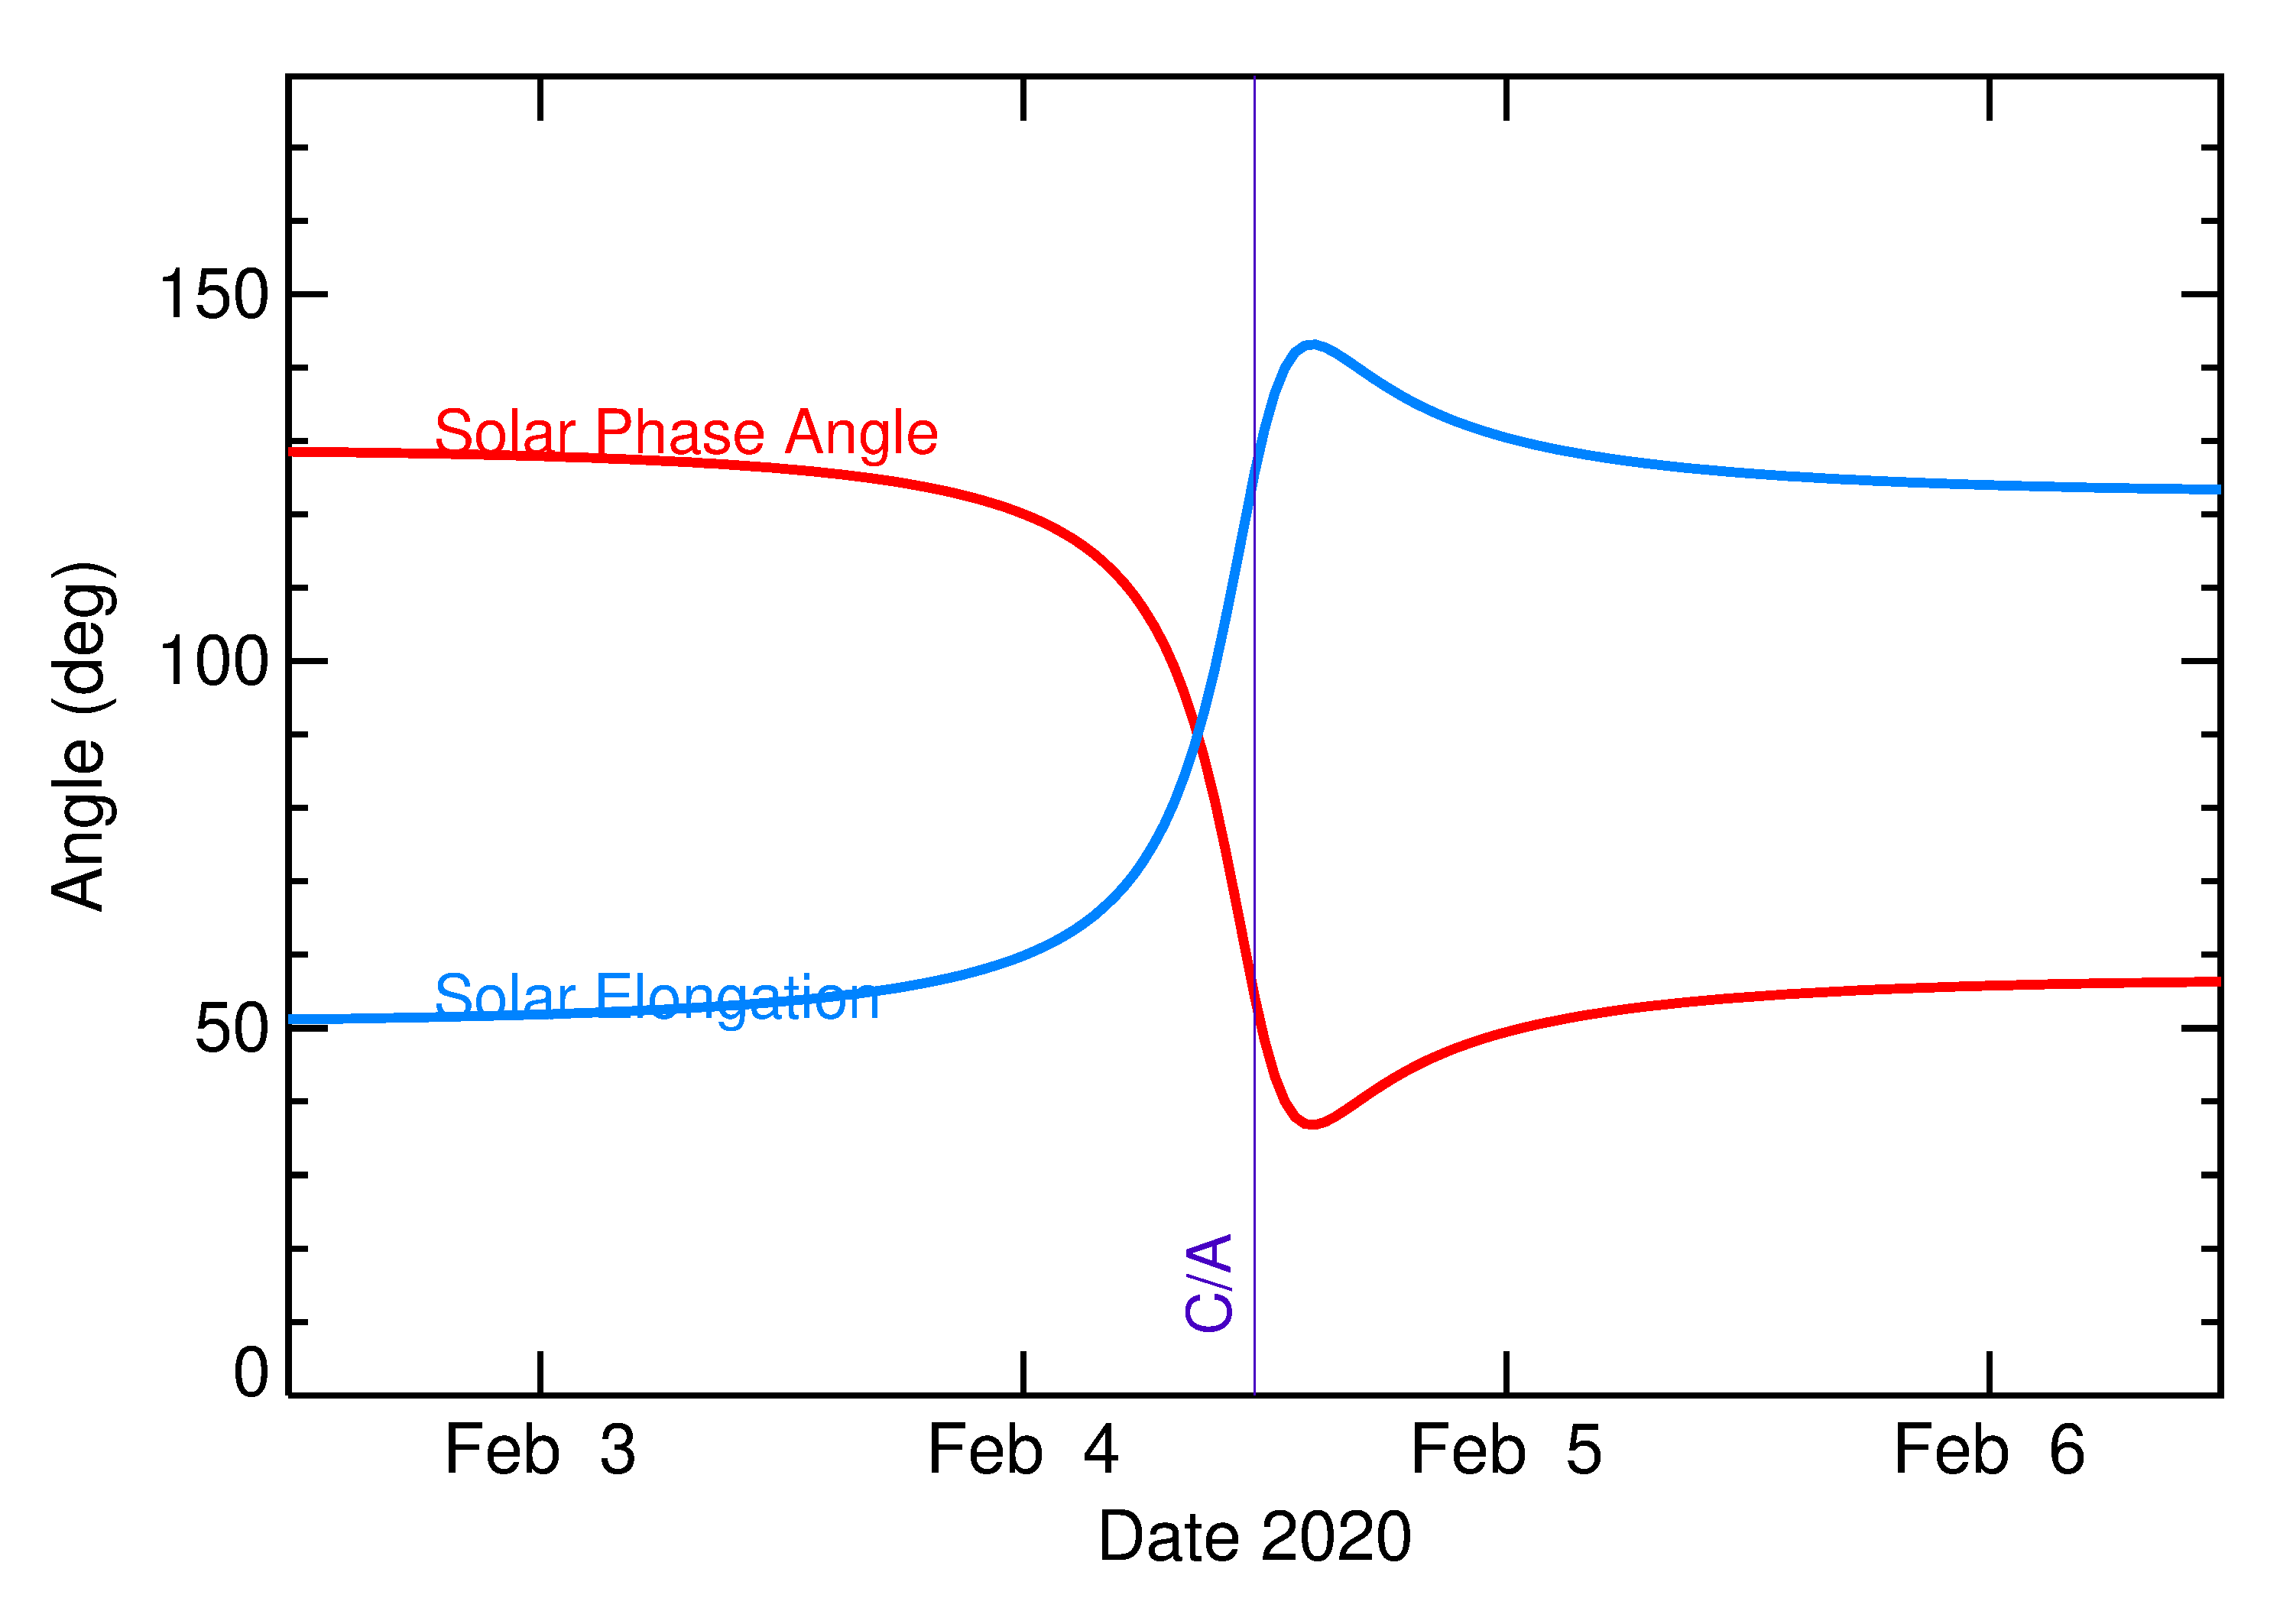 Solar Elongation and Solar Phase Angle of 2020 CQ1 in the days around closest approach